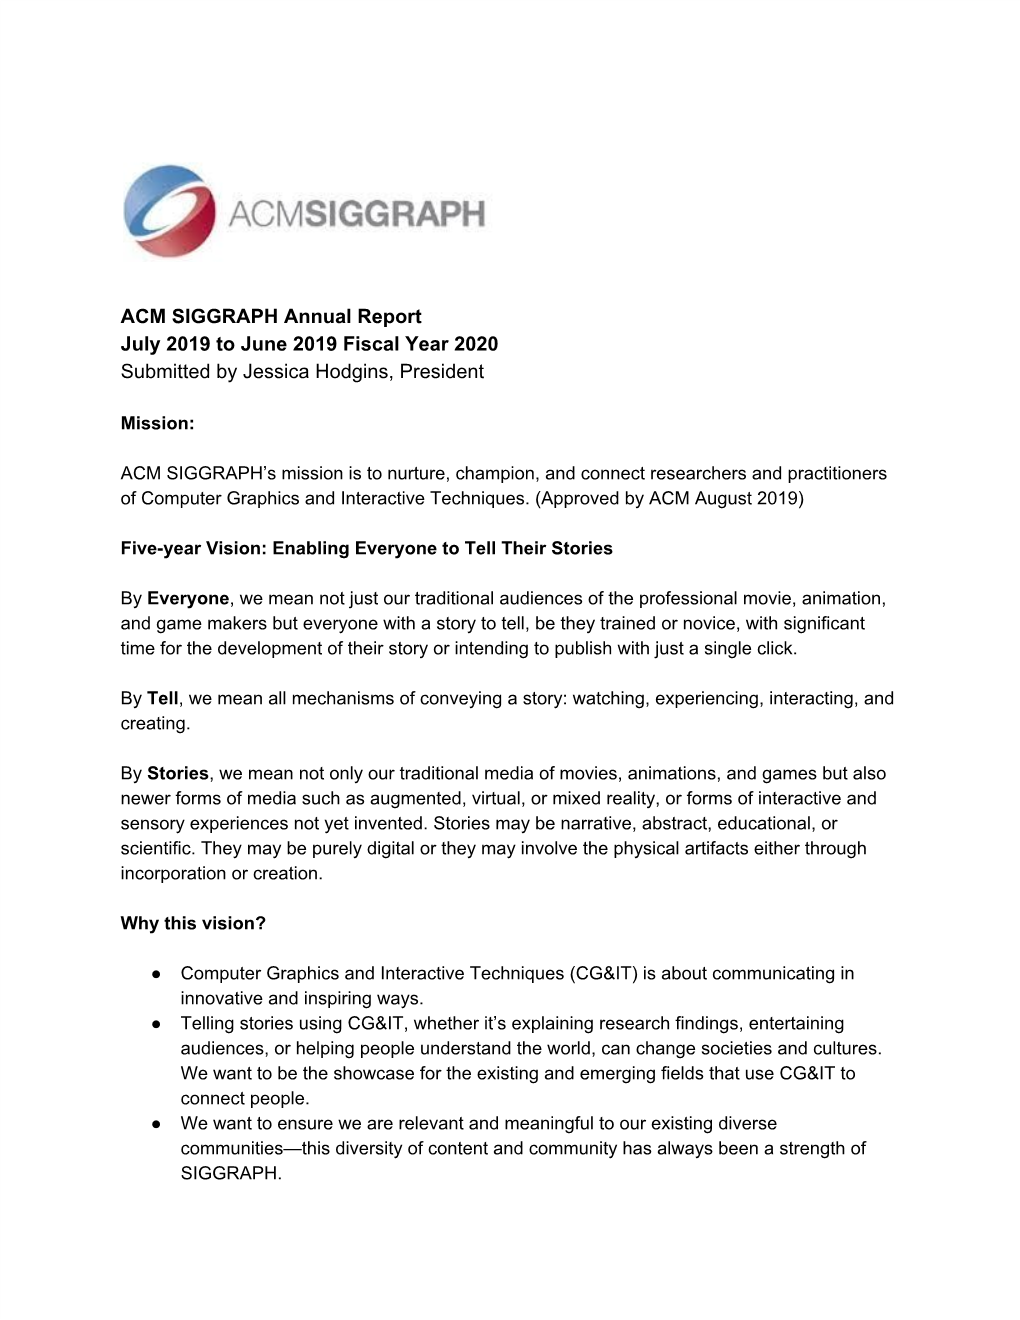 ACM SIGGRAPH Annual Report July 2019 to June 2019 Fiscal Year 2020 Submitted by Jessica Hodgins, President